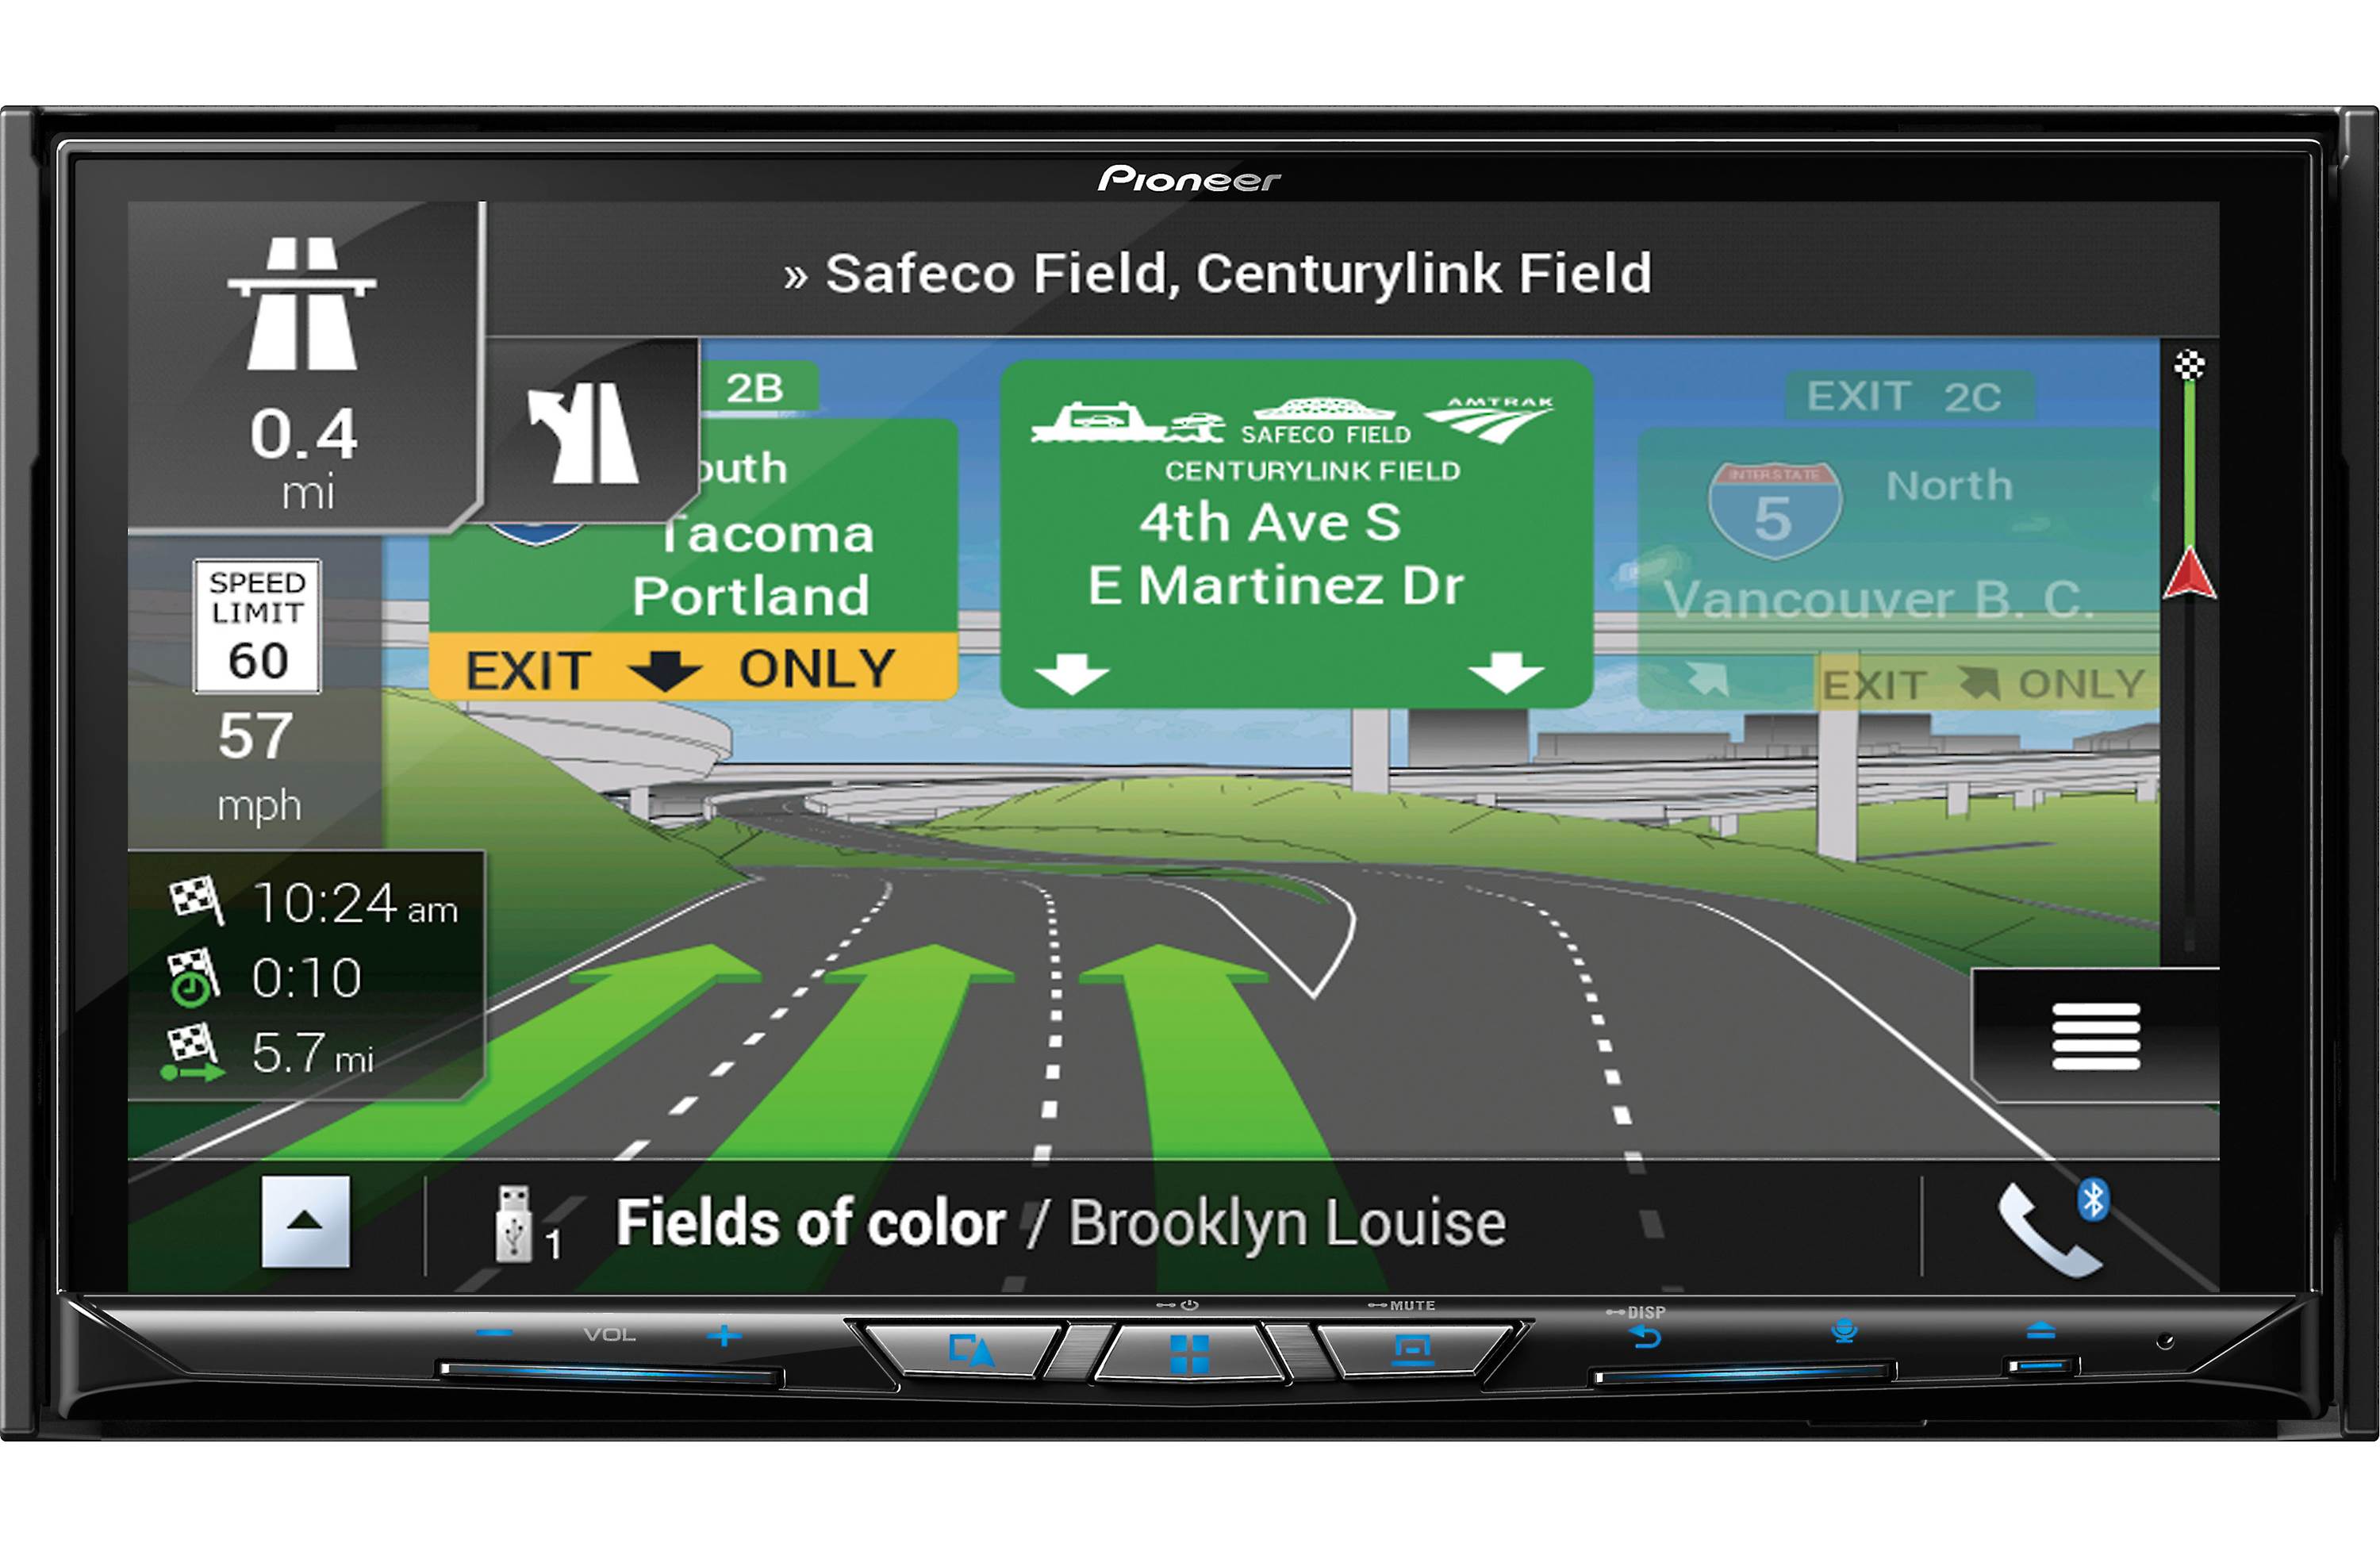 Pioneer AVIC-W8400NEX - Flagship In-Dash Navigation AV Receiver with 7 Inch WVGA Capacitive Touchscreen Display - GPS Navigation receivers - Custom Sounds &